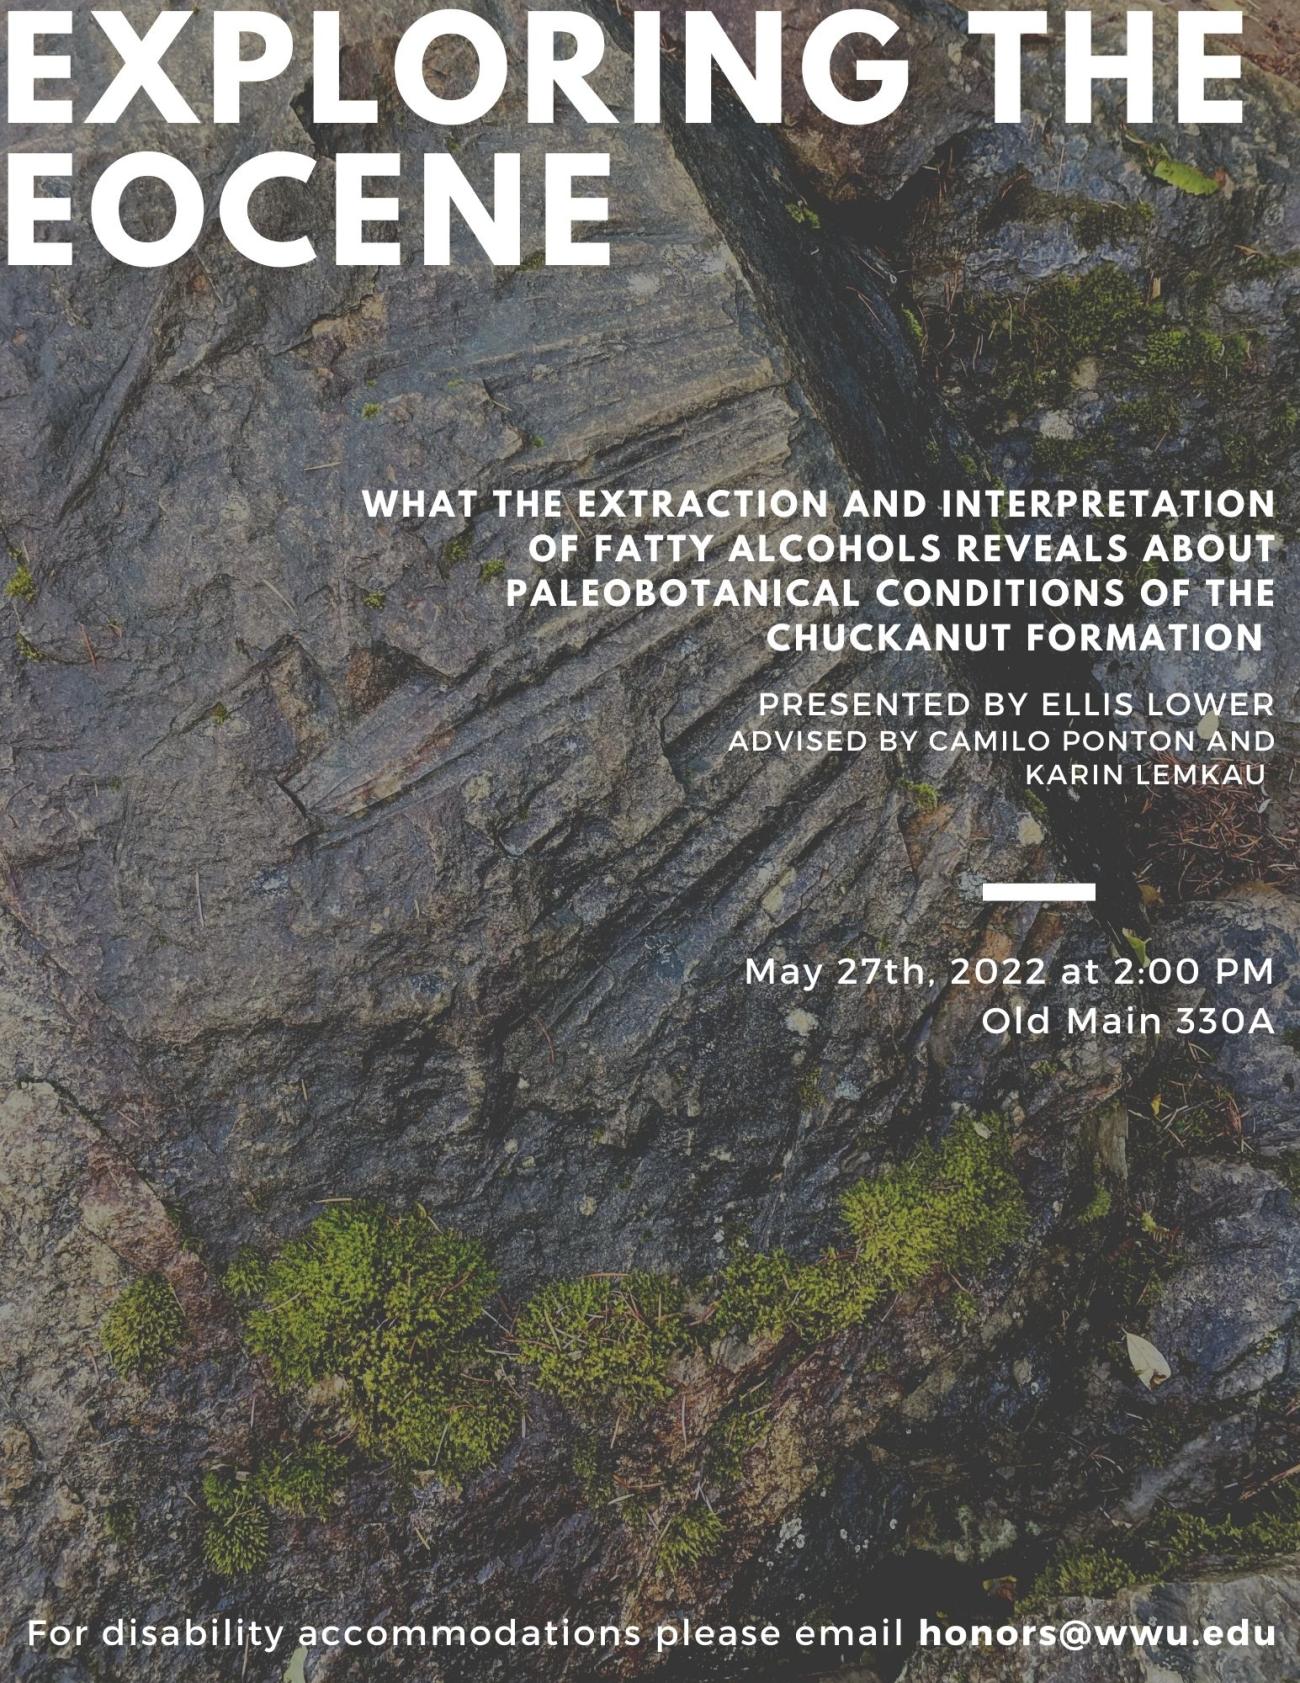 Background of poster is a wet, mossy, sandstone rock with a visible palm fossil. Text reads: "Exploring the Eocene: What the extraction and interpretation of fatty alcohols reveals about the palaeobotanical conditions of the Chuckanut Formation. Presented by Ellis Lower. Advised by Camilo Ponton and Karin Lemkau. May 27th, 2022, 2:00 PM, Old Main 330A. For disability accommodations please email honors@wwu.edu".